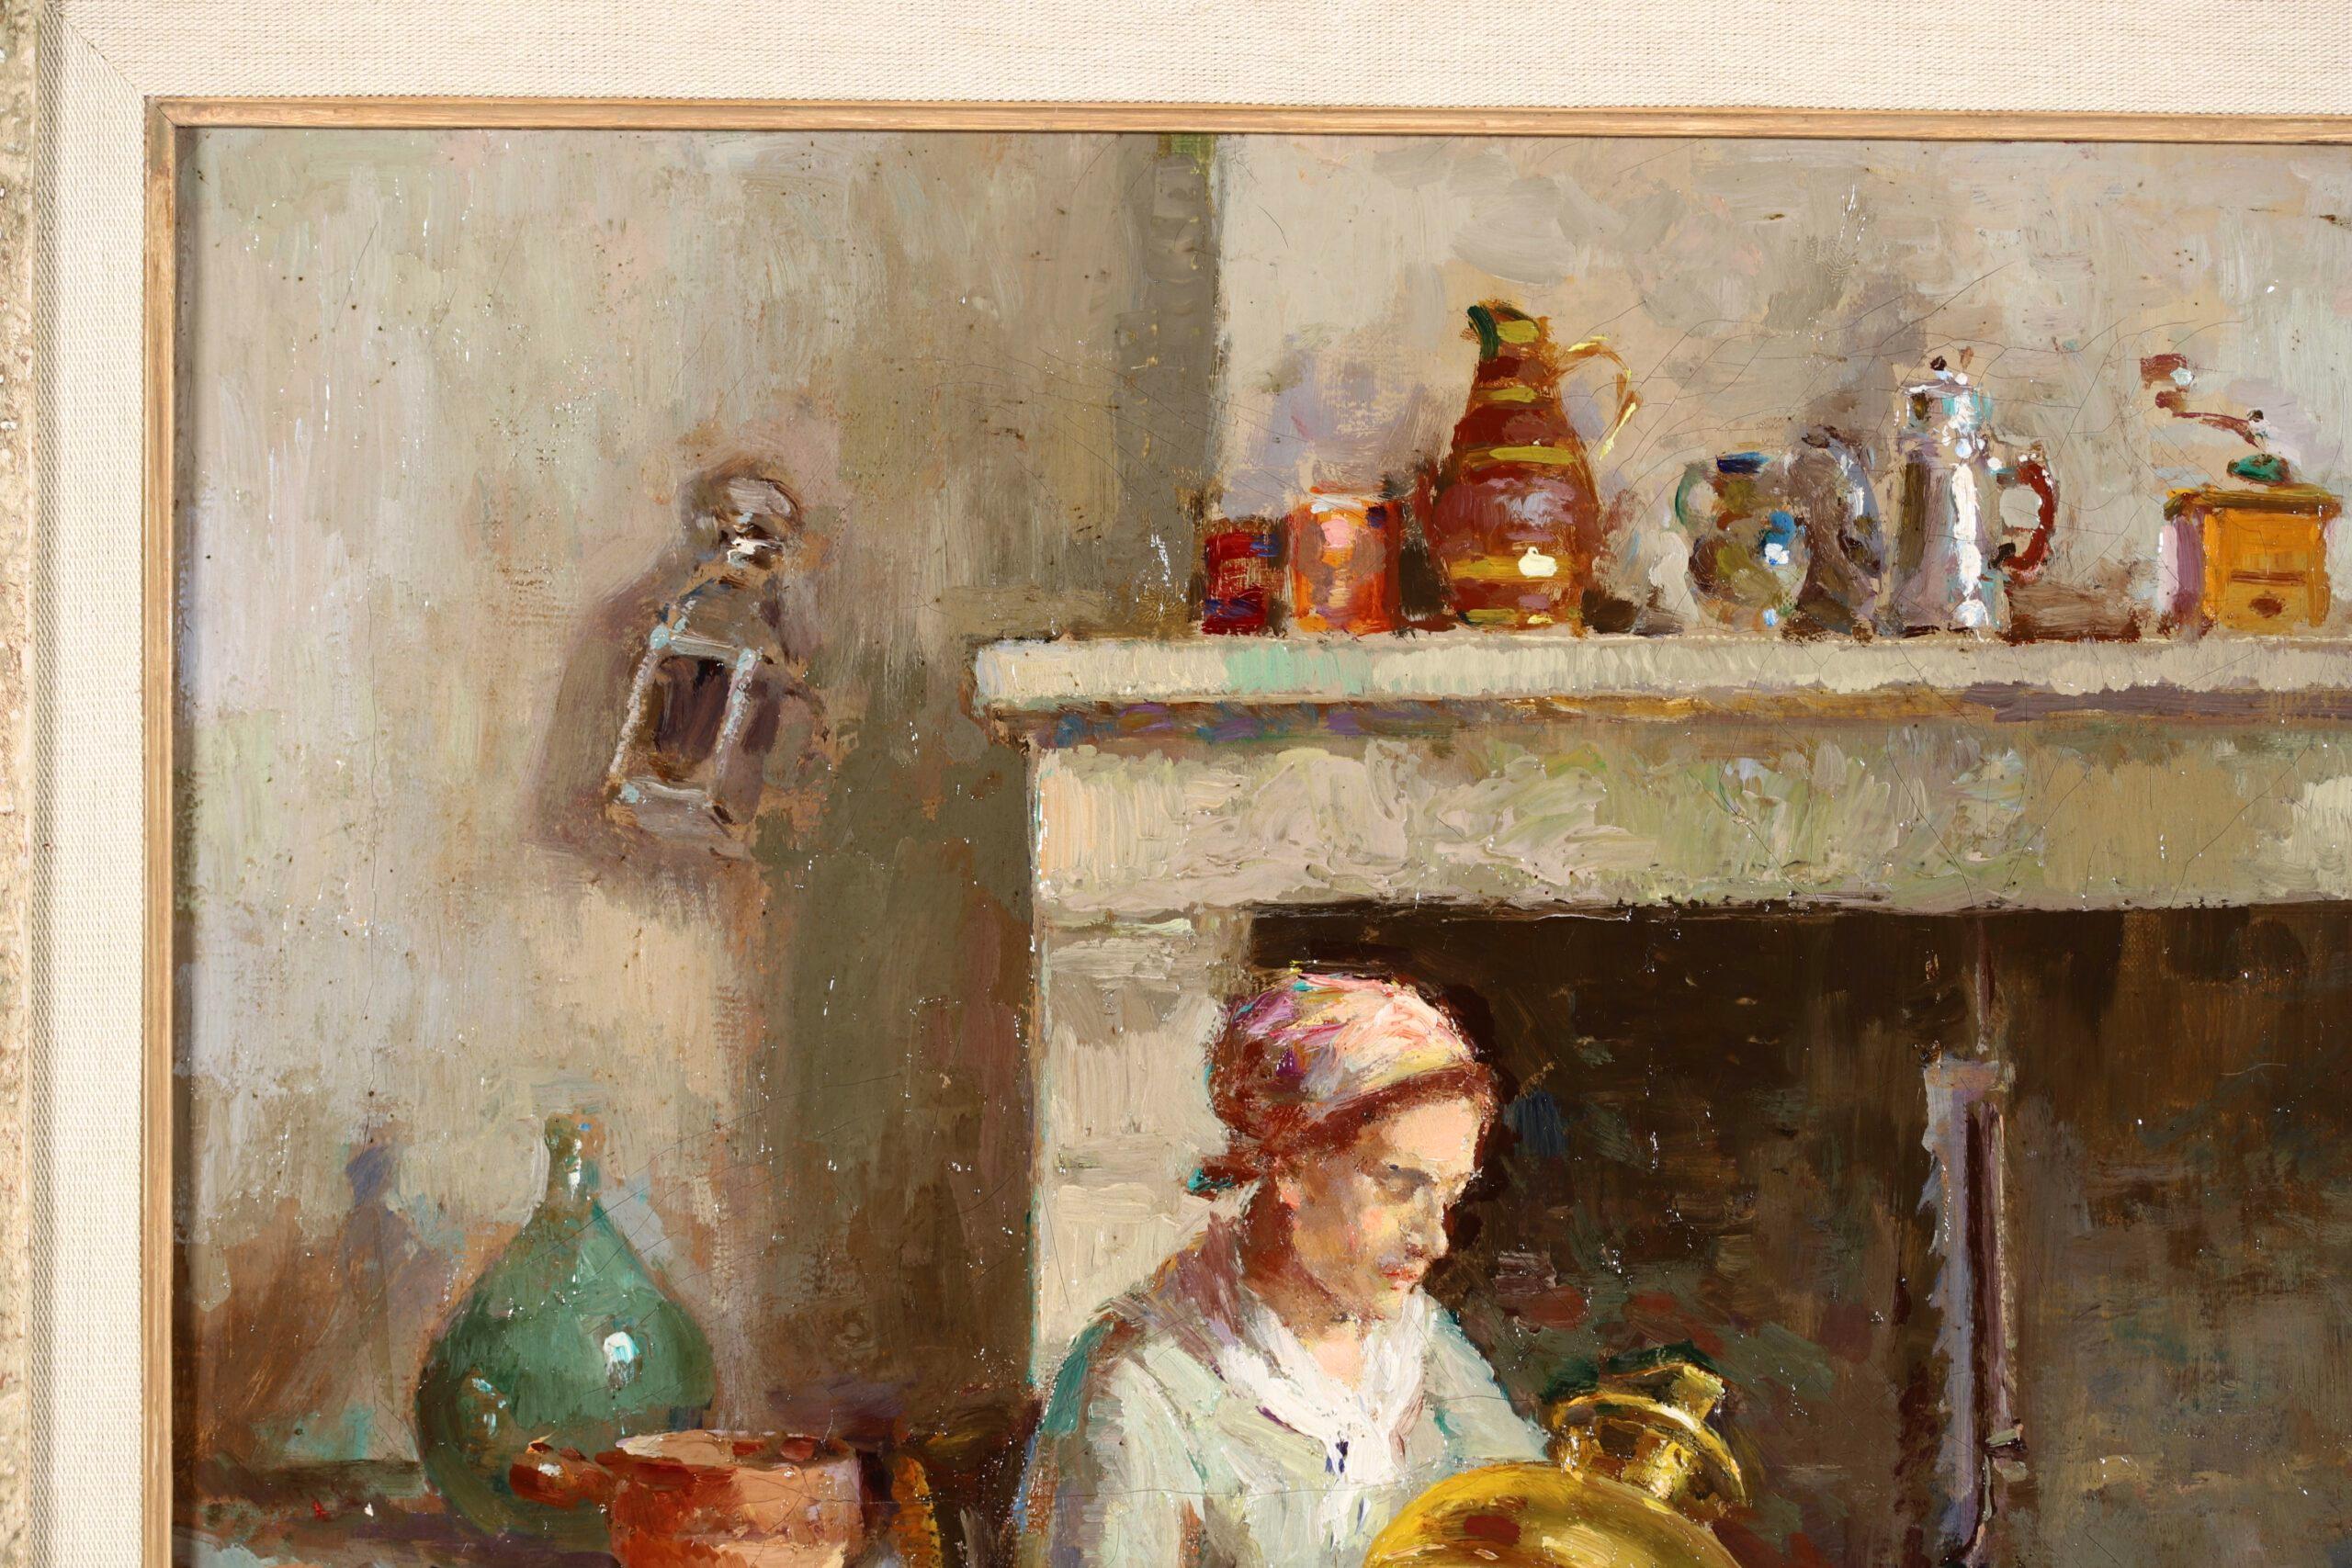 Signed figure in interior oil on canvas circa 1920 by sought after French impressionist painter Edouard Leon Cortes. This charming and nostalgic work depicts a lady is seated by a fire place polishing brass and copper pots. 

Signature:
Signed lower